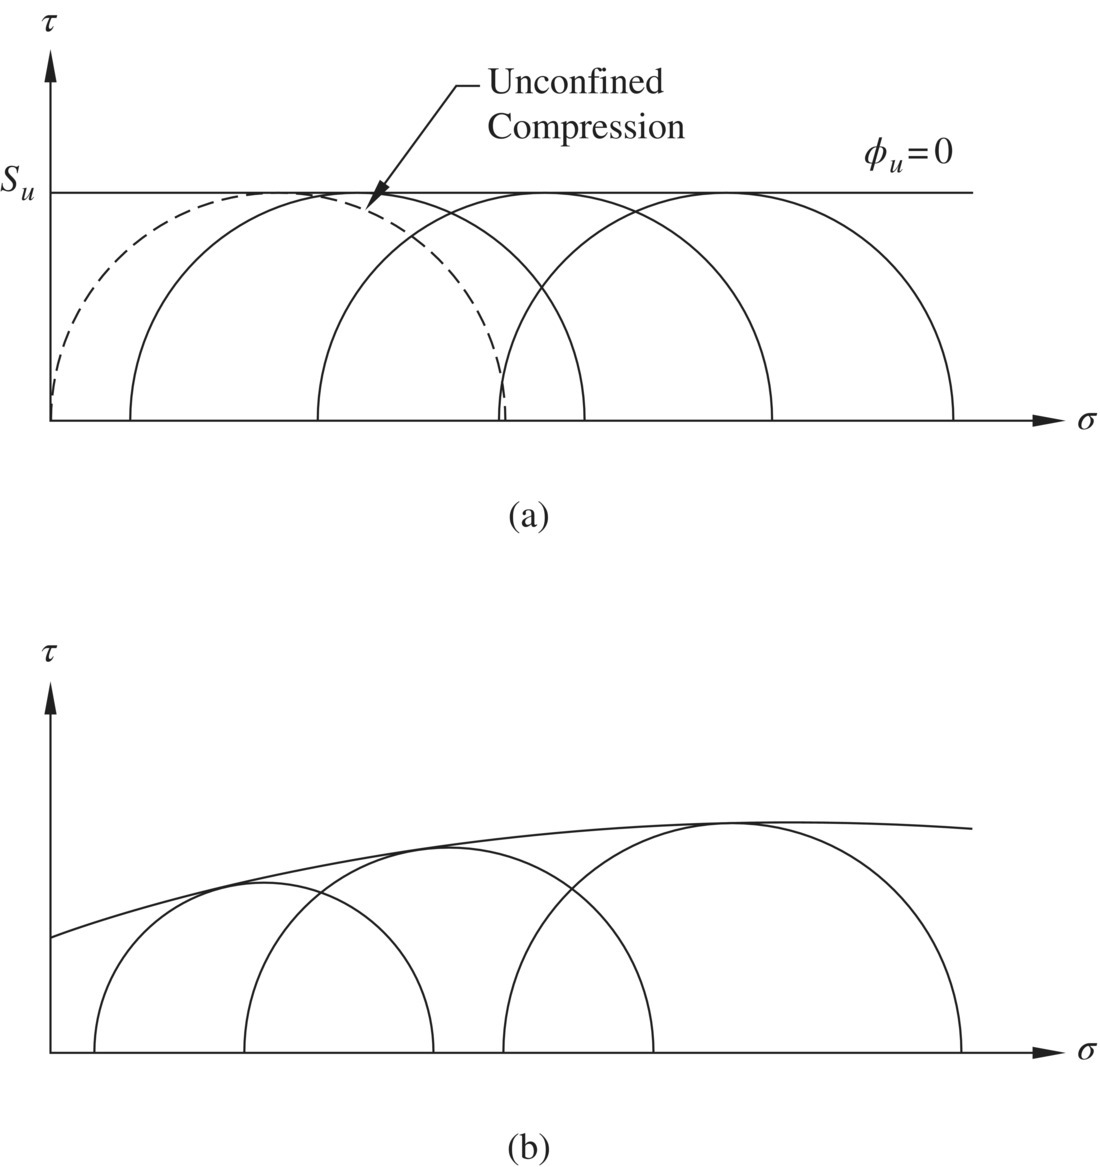 Graphs overlapping dashed arc (unconfined compression) and solid arcs having a horizontal line at the top portion labeled ϕu=0 (top) and an overlapping arc with various sizes having an ascending curve at the top (bottom).